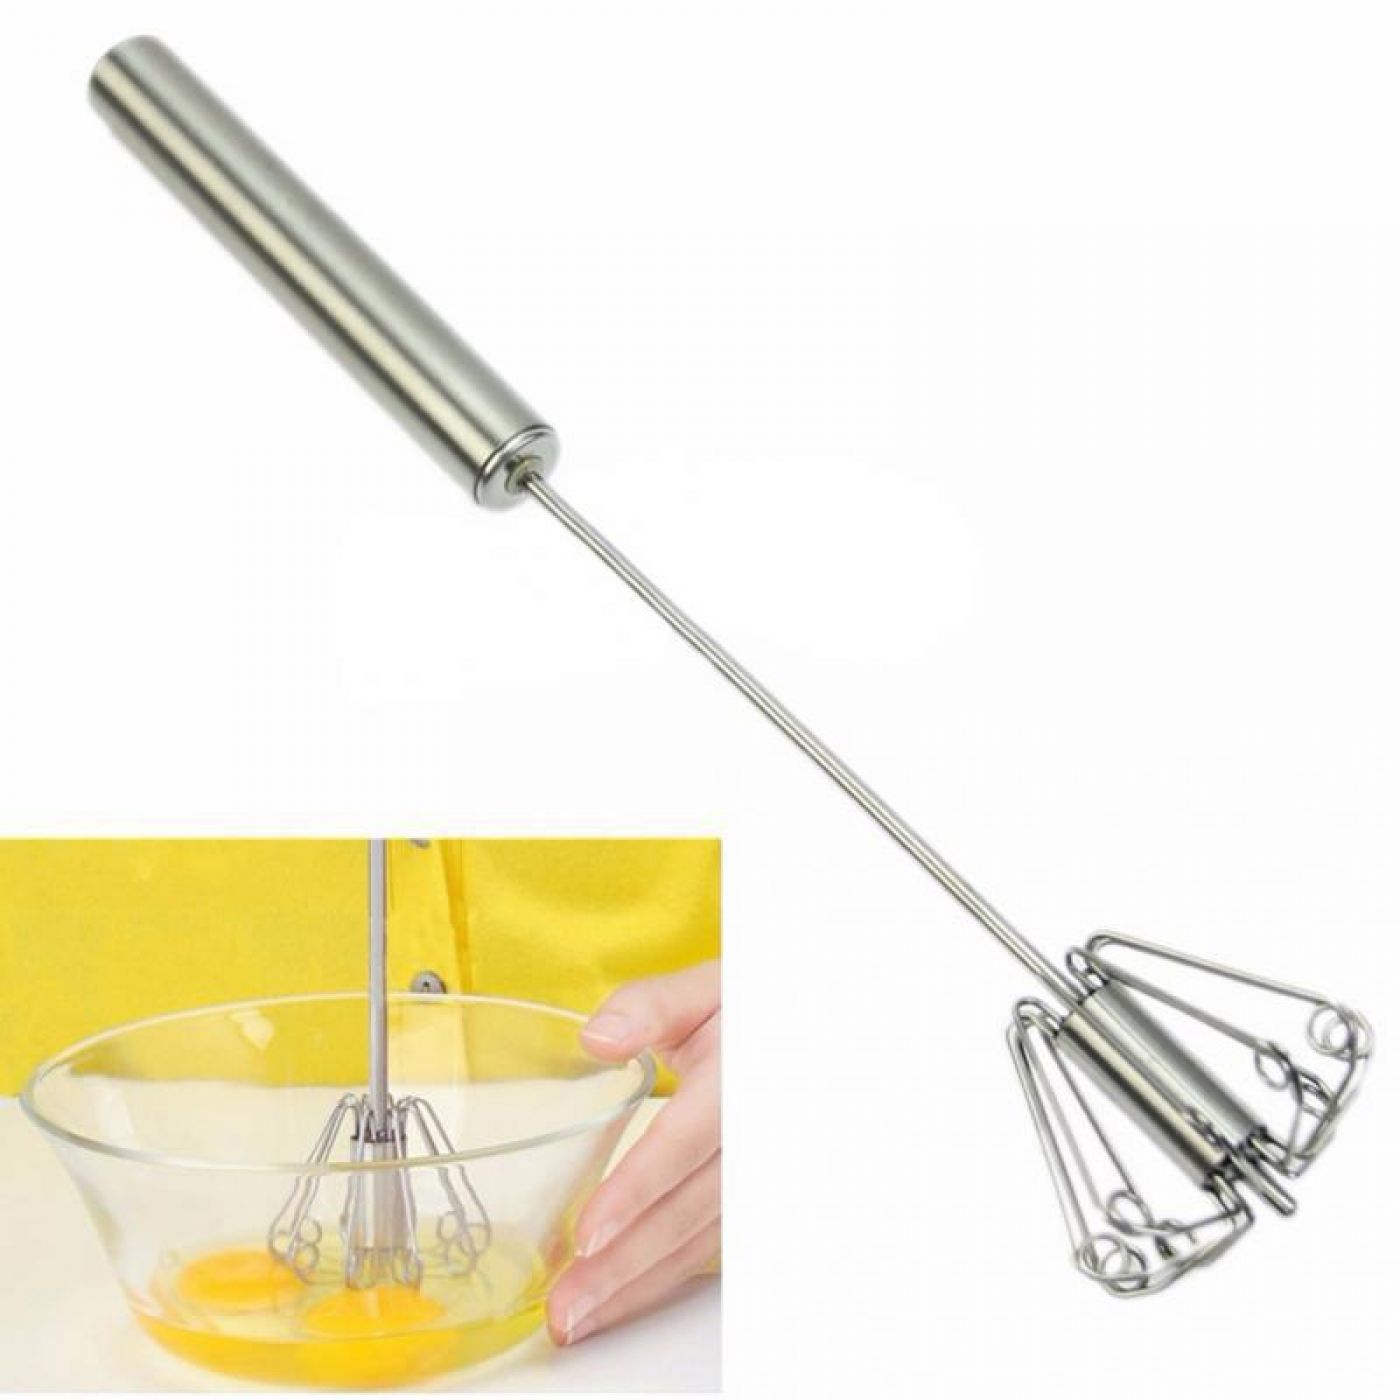 Self-Spinning Mixer Whisk - Online Low Price - MOLOOCO